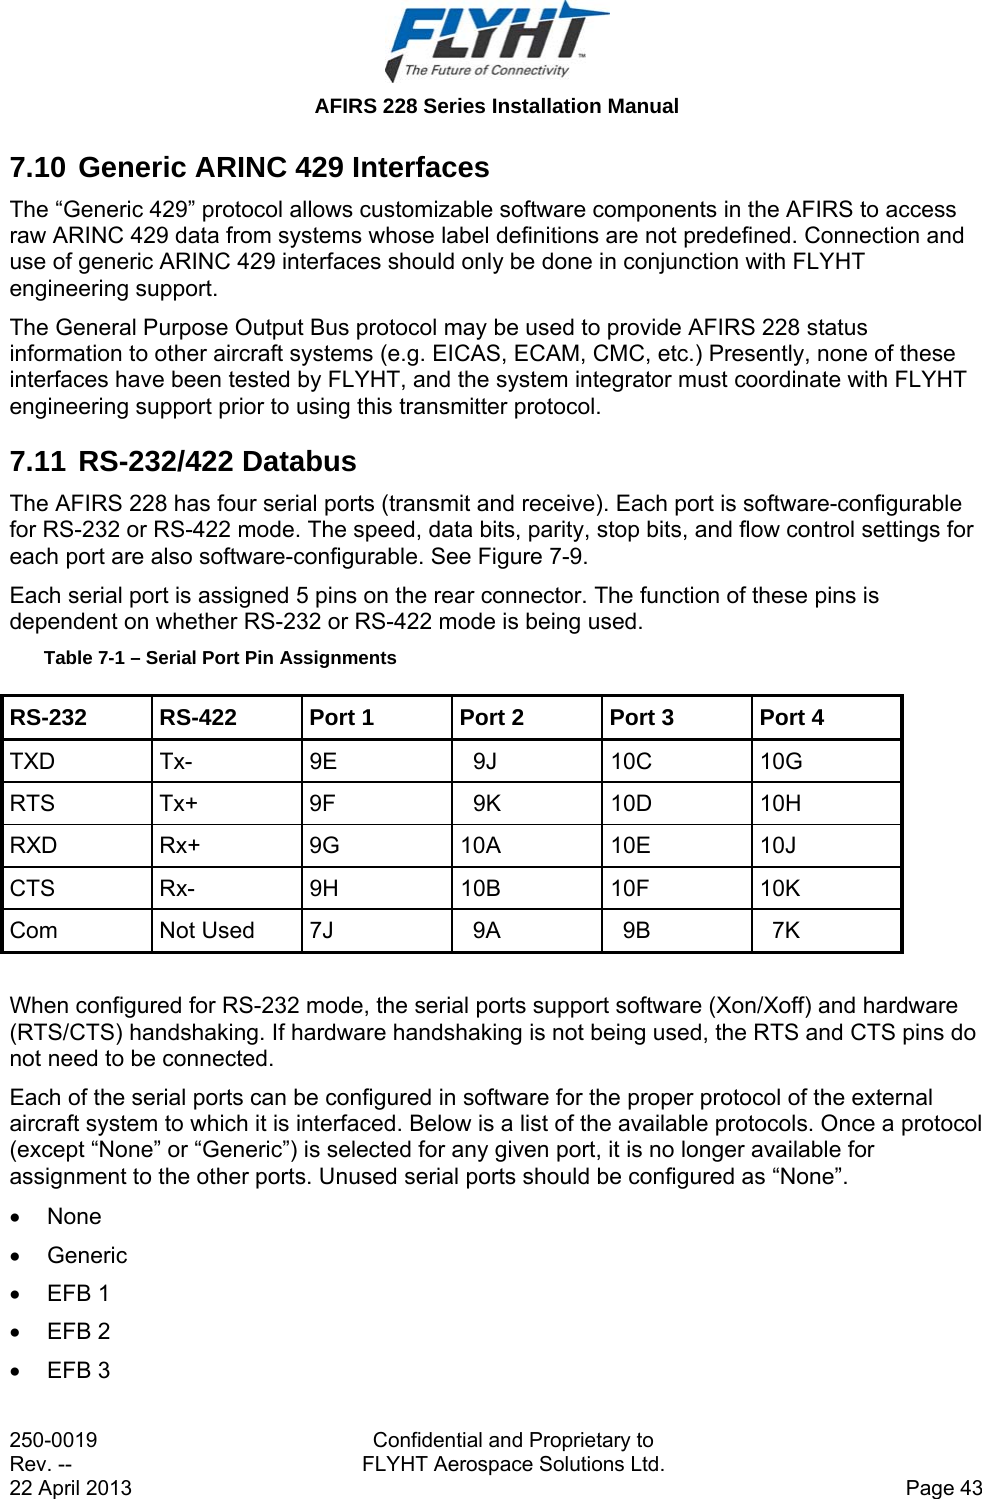  AFIRS 228 Series Installation Manual 250-0019  Confidential and Proprietary to Rev. --  FLYHT Aerospace Solutions Ltd. 22 April 2013    Page 43 7.10 Generic ARINC 429 Interfaces The “Generic 429” protocol allows customizable software components in the AFIRS to access raw ARINC 429 data from systems whose label definitions are not predefined. Connection and use of generic ARINC 429 interfaces should only be done in conjunction with FLYHT engineering support. The General Purpose Output Bus protocol may be used to provide AFIRS 228 status information to other aircraft systems (e.g. EICAS, ECAM, CMC, etc.) Presently, none of these interfaces have been tested by FLYHT, and the system integrator must coordinate with FLYHT engineering support prior to using this transmitter protocol. 7.11 RS-232/422 Databus The AFIRS 228 has four serial ports (transmit and receive). Each port is software-configurable for RS-232 or RS-422 mode. The speed, data bits, parity, stop bits, and flow control settings for each port are also software-configurable. See Figure 7-9. Each serial port is assigned 5 pins on the rear connector. The function of these pins is dependent on whether RS-232 or RS-422 mode is being used. Table 7-1 – Serial Port Pin Assignments RS-232  RS-422  Port 1  Port 2  Port 3  Port 4 TXD Tx-  9E  9J  10C  10G RTS Tx+  9F  9K  10D  10H RXD Rx+  9G  10A  10E  10J CTS Rx-  9H  10B  10F  10K Com Not Used 7J  9A  9B  7K  When configured for RS-232 mode, the serial ports support software (Xon/Xoff) and hardware (RTS/CTS) handshaking. If hardware handshaking is not being used, the RTS and CTS pins do not need to be connected. Each of the serial ports can be configured in software for the proper protocol of the external aircraft system to which it is interfaced. Below is a list of the available protocols. Once a protocol (except “None” or “Generic”) is selected for any given port, it is no longer available for assignment to the other ports. Unused serial ports should be configured as “None”.  None  Generic  EFB 1  EFB 2  EFB 3 